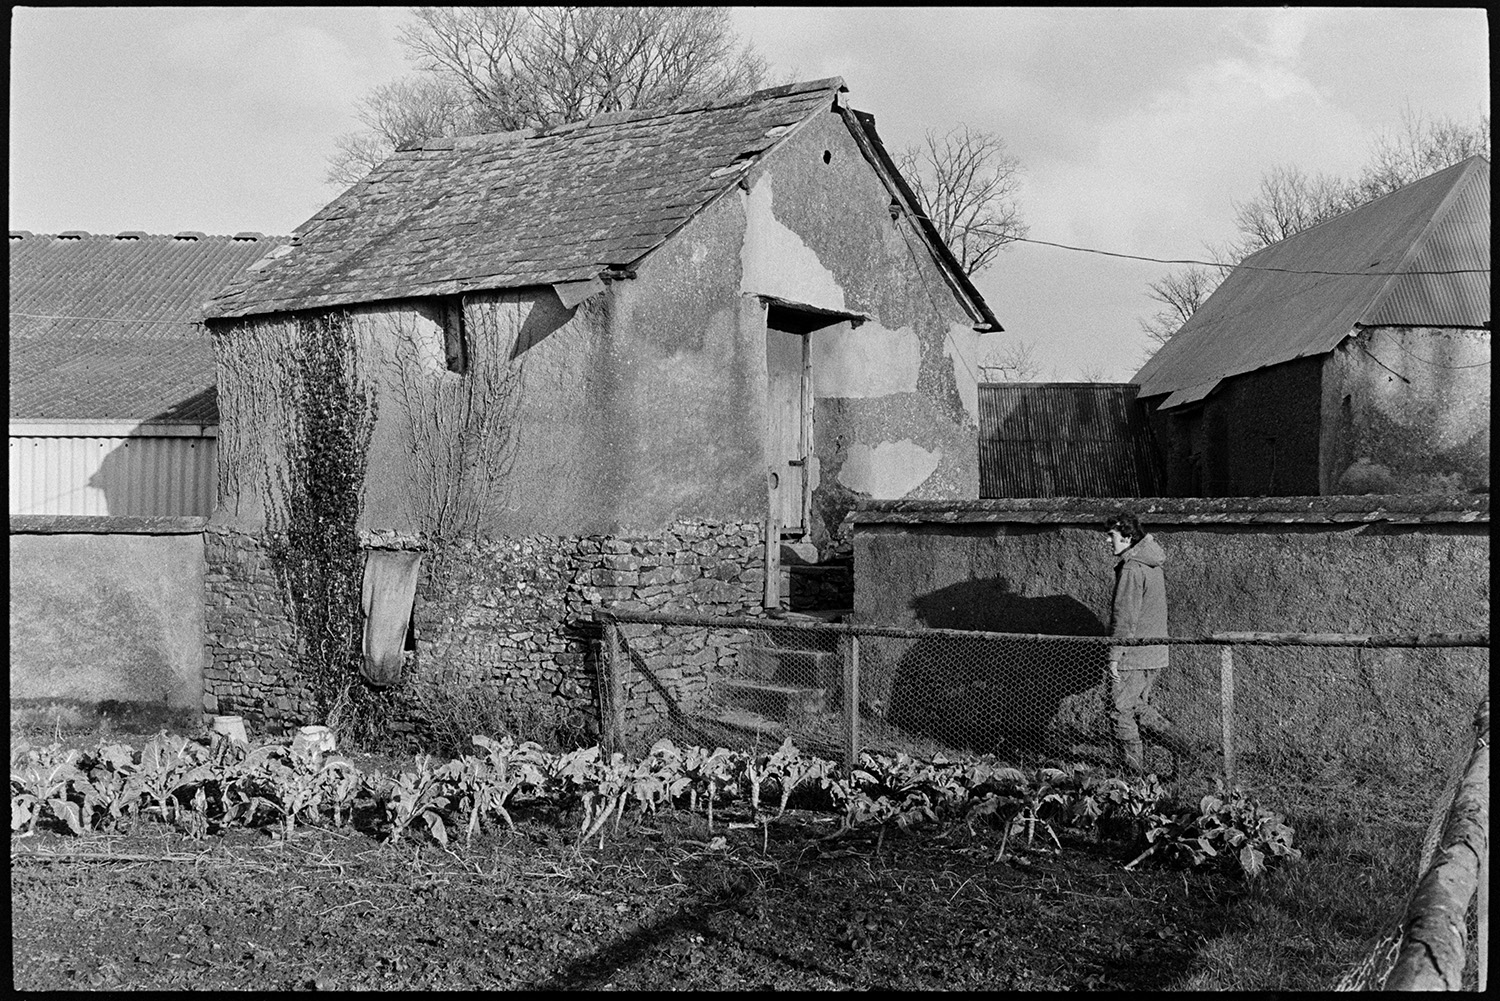 Farmer checking ewes and lambs and feeding in barn. 
[Graham ward walking past a small vegetable patch toward a cob, stone and tiled barn at Parsonage, Iddesleigh. He is going to check on ewes and lambs.]